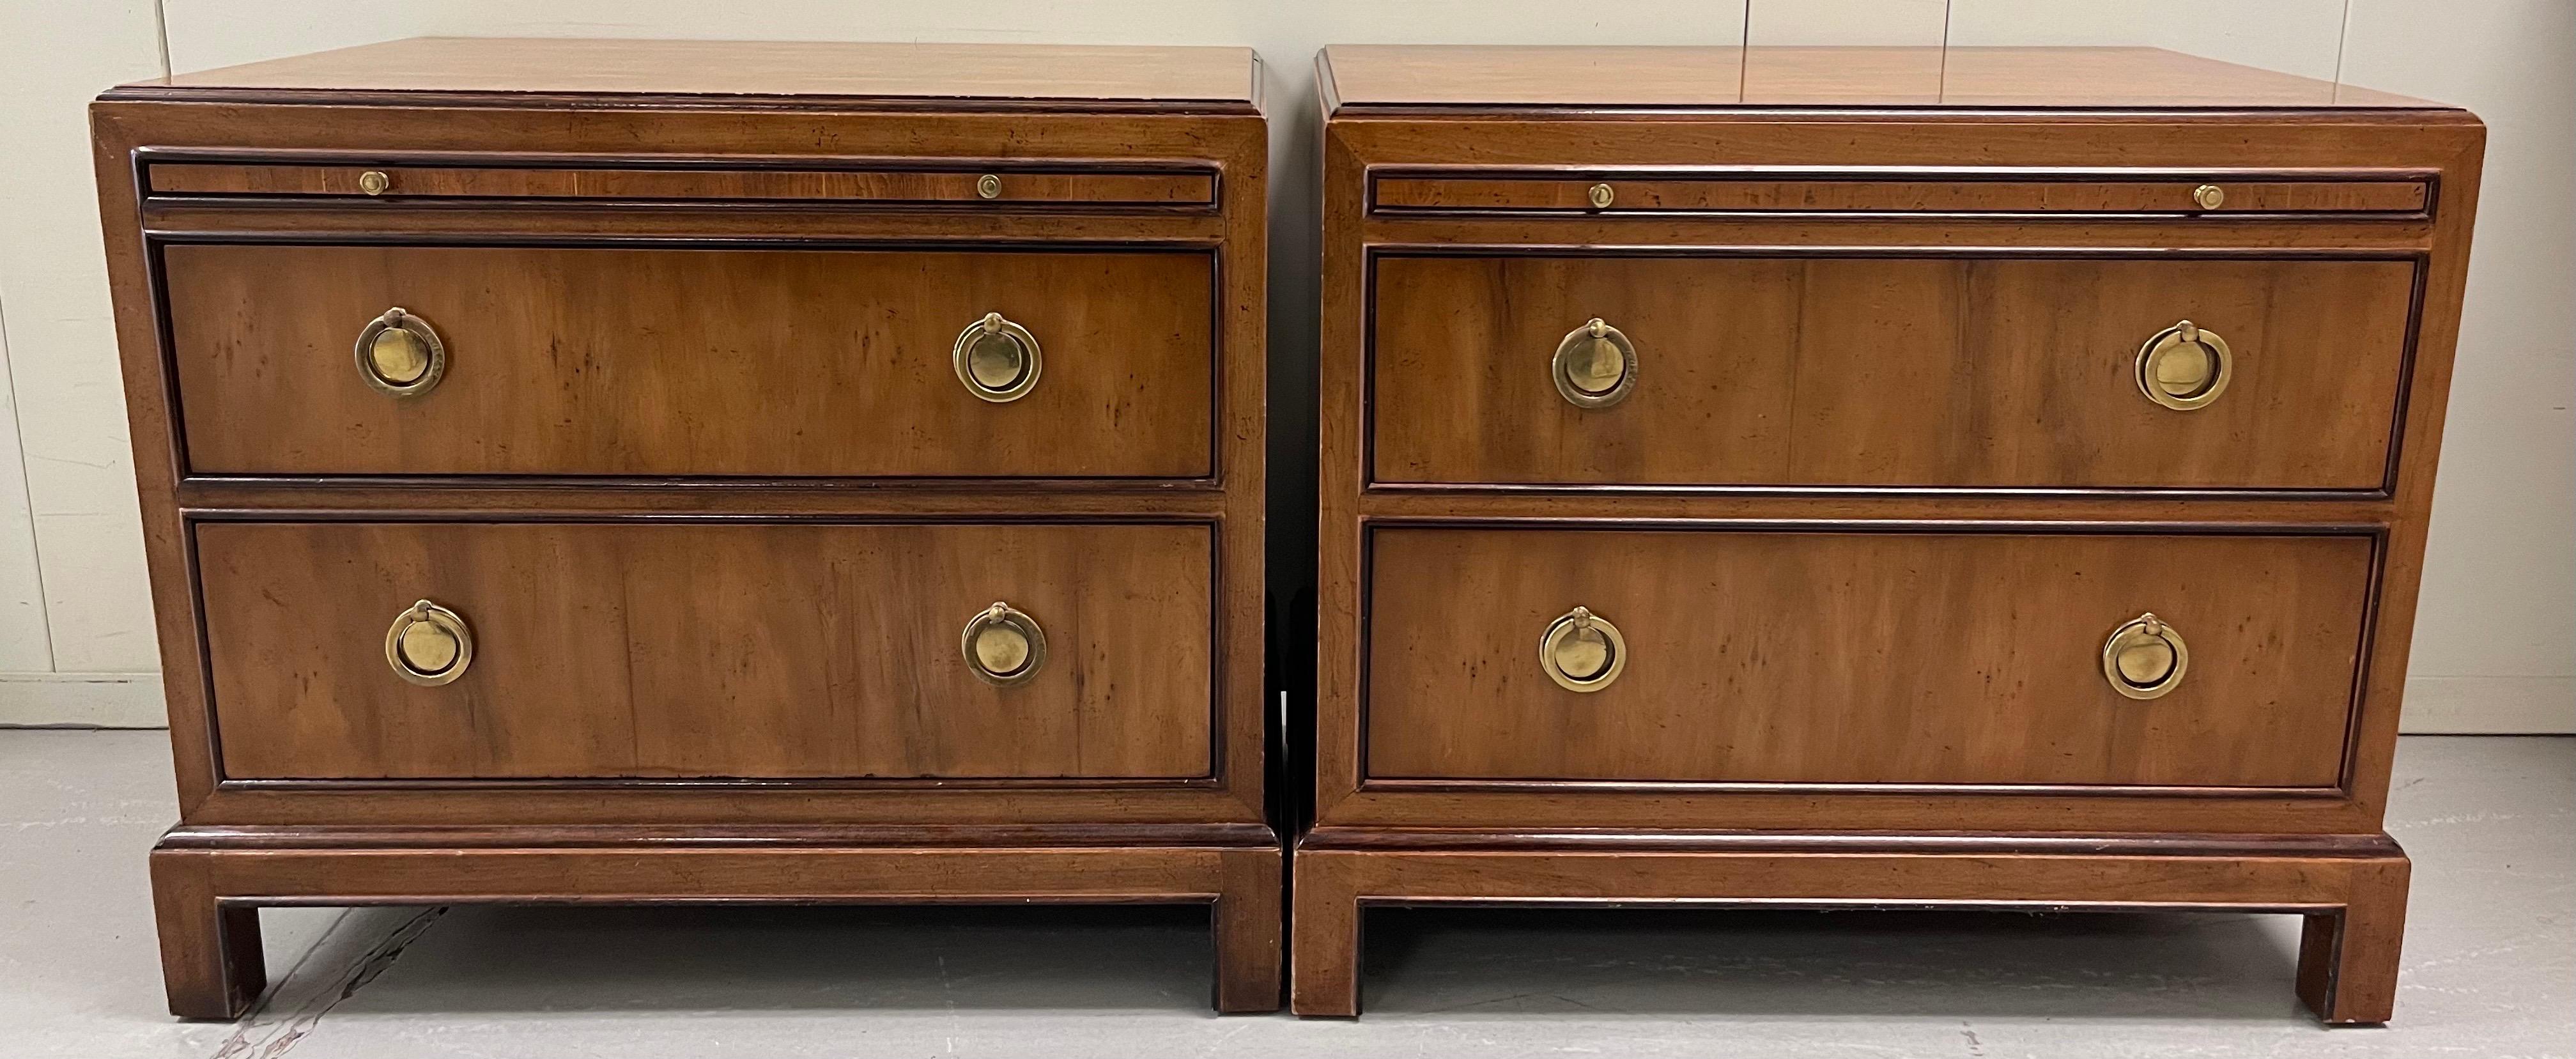 Pair of Drexel Heritage campaign style Burlwood nightstands. Original stained wood finish. Brass ring pull hardware. 2 drawer style with additional pull out shelf. Each piece retains Drexel Heritage brand tag. 